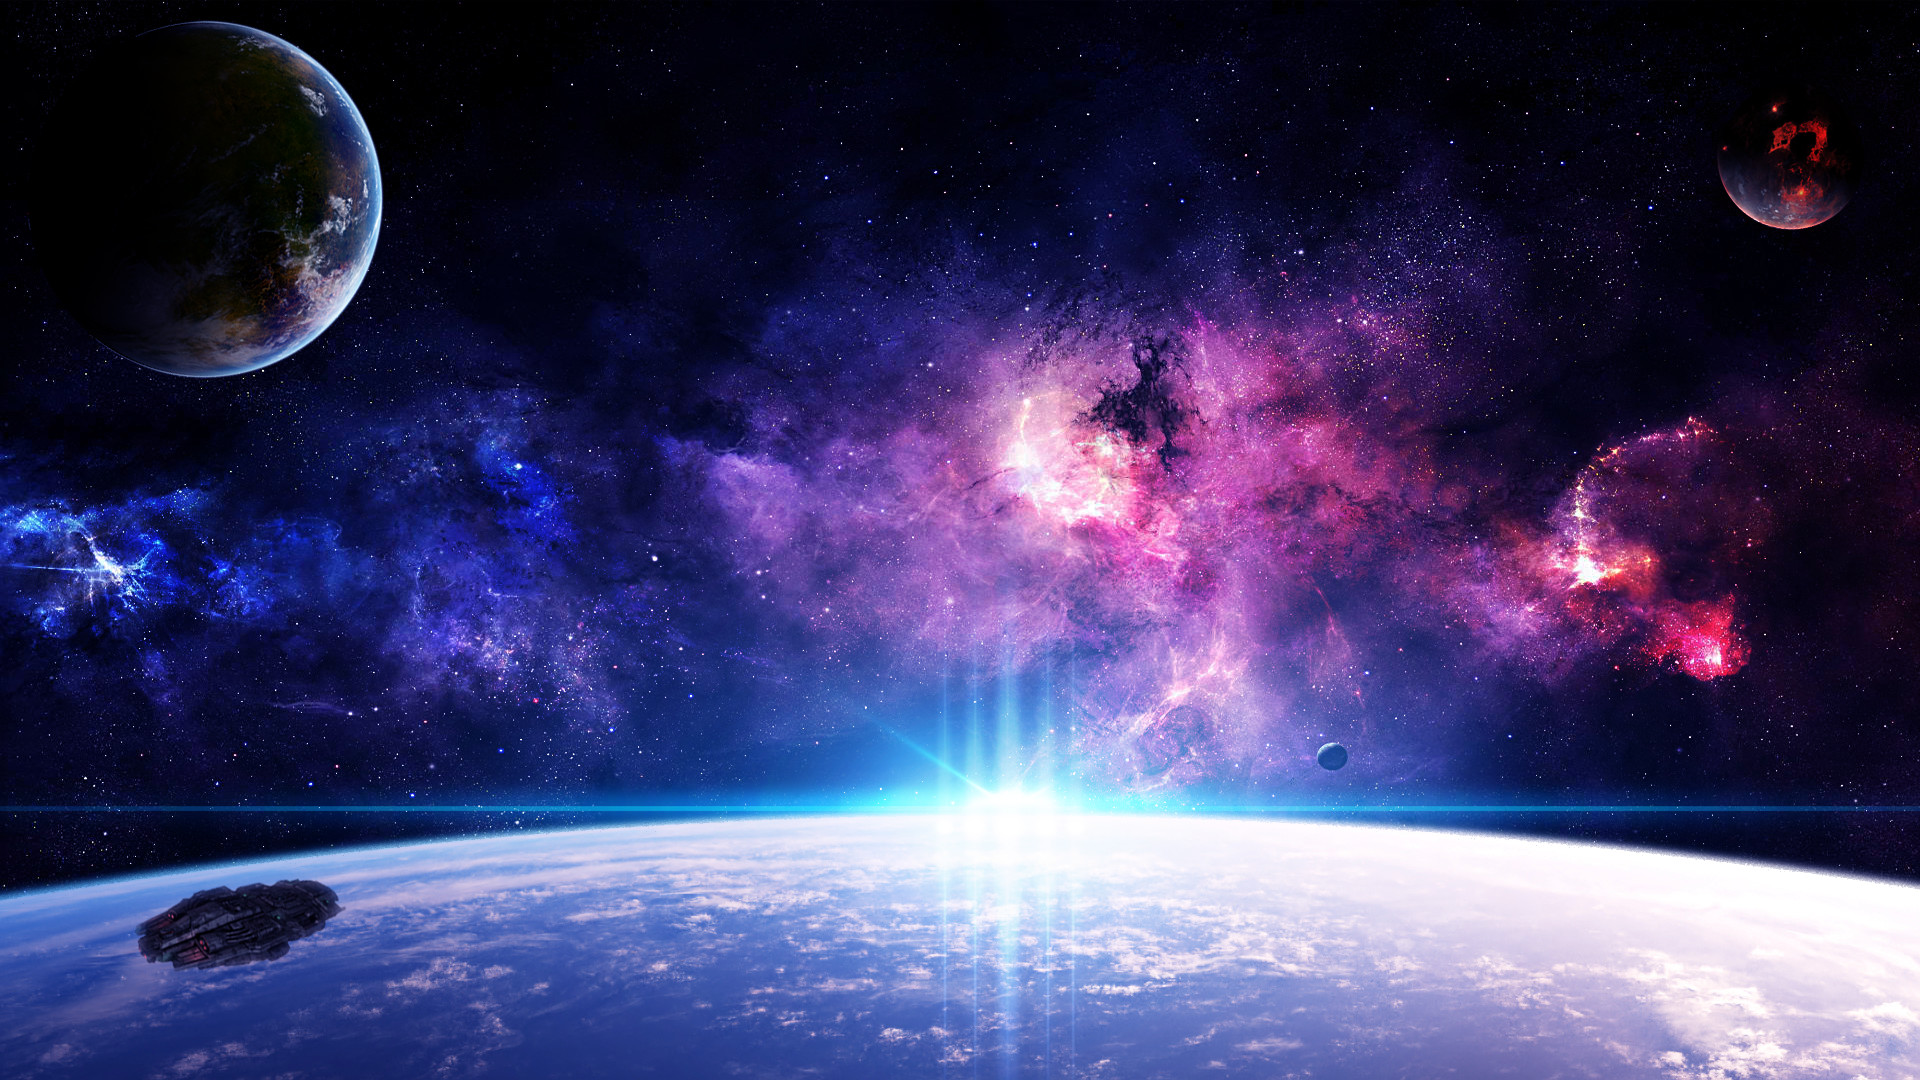 Space-Hd-Wallpapers-1080P-wallpaper | Wallpapers Photos Pictures | Space |  Pinterest | Hd wallpaper and Wallpaper